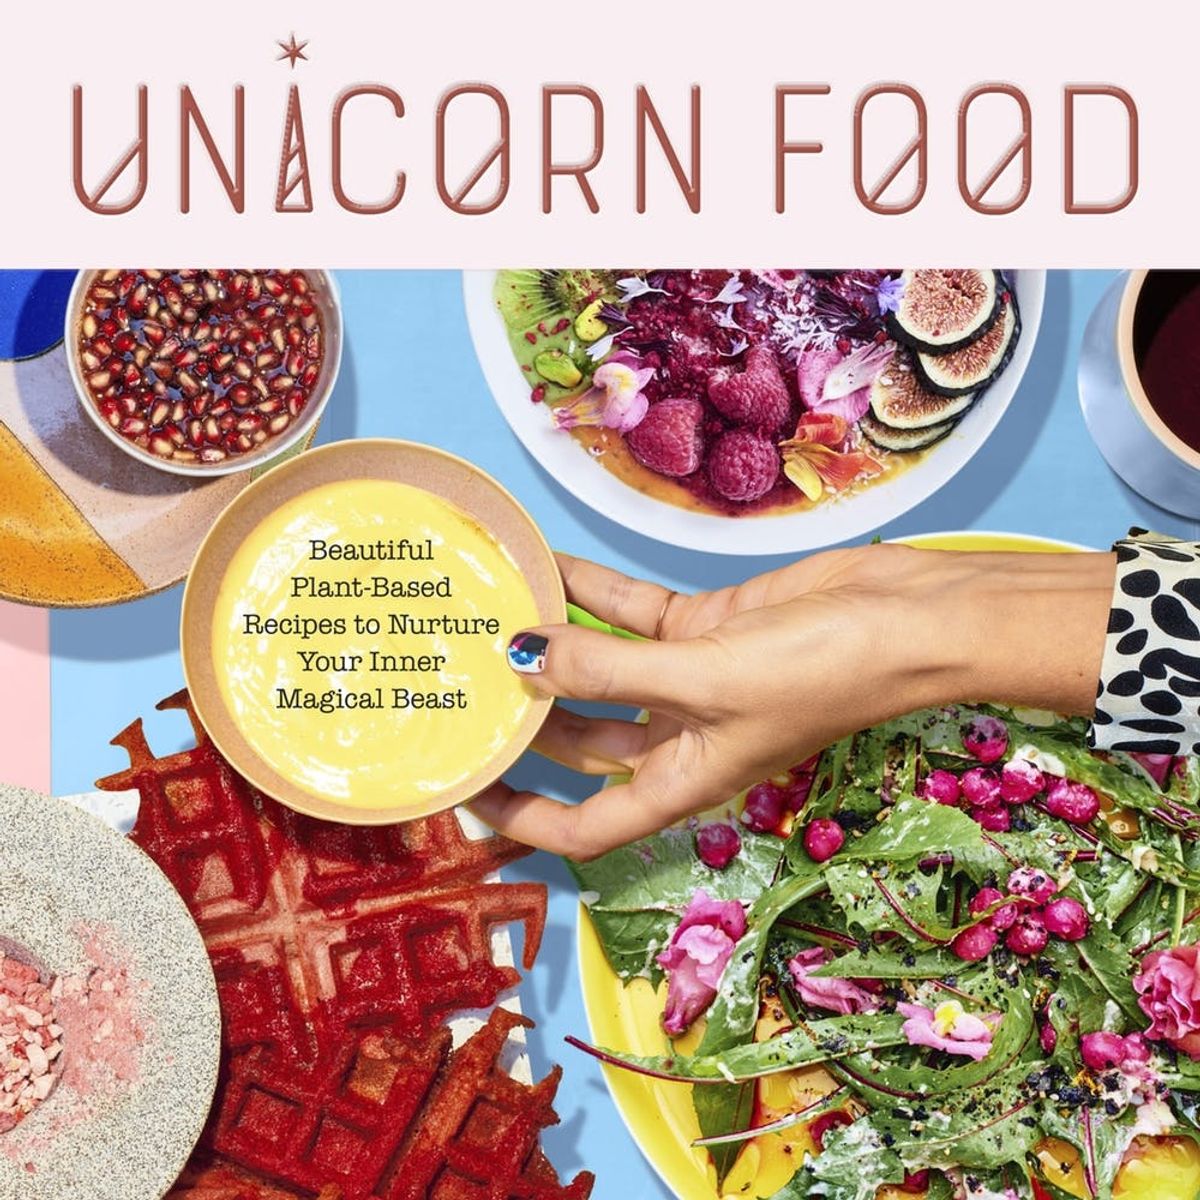 Nurture Your “Inner Magical Beast” With This Unicorn Food Cookbook